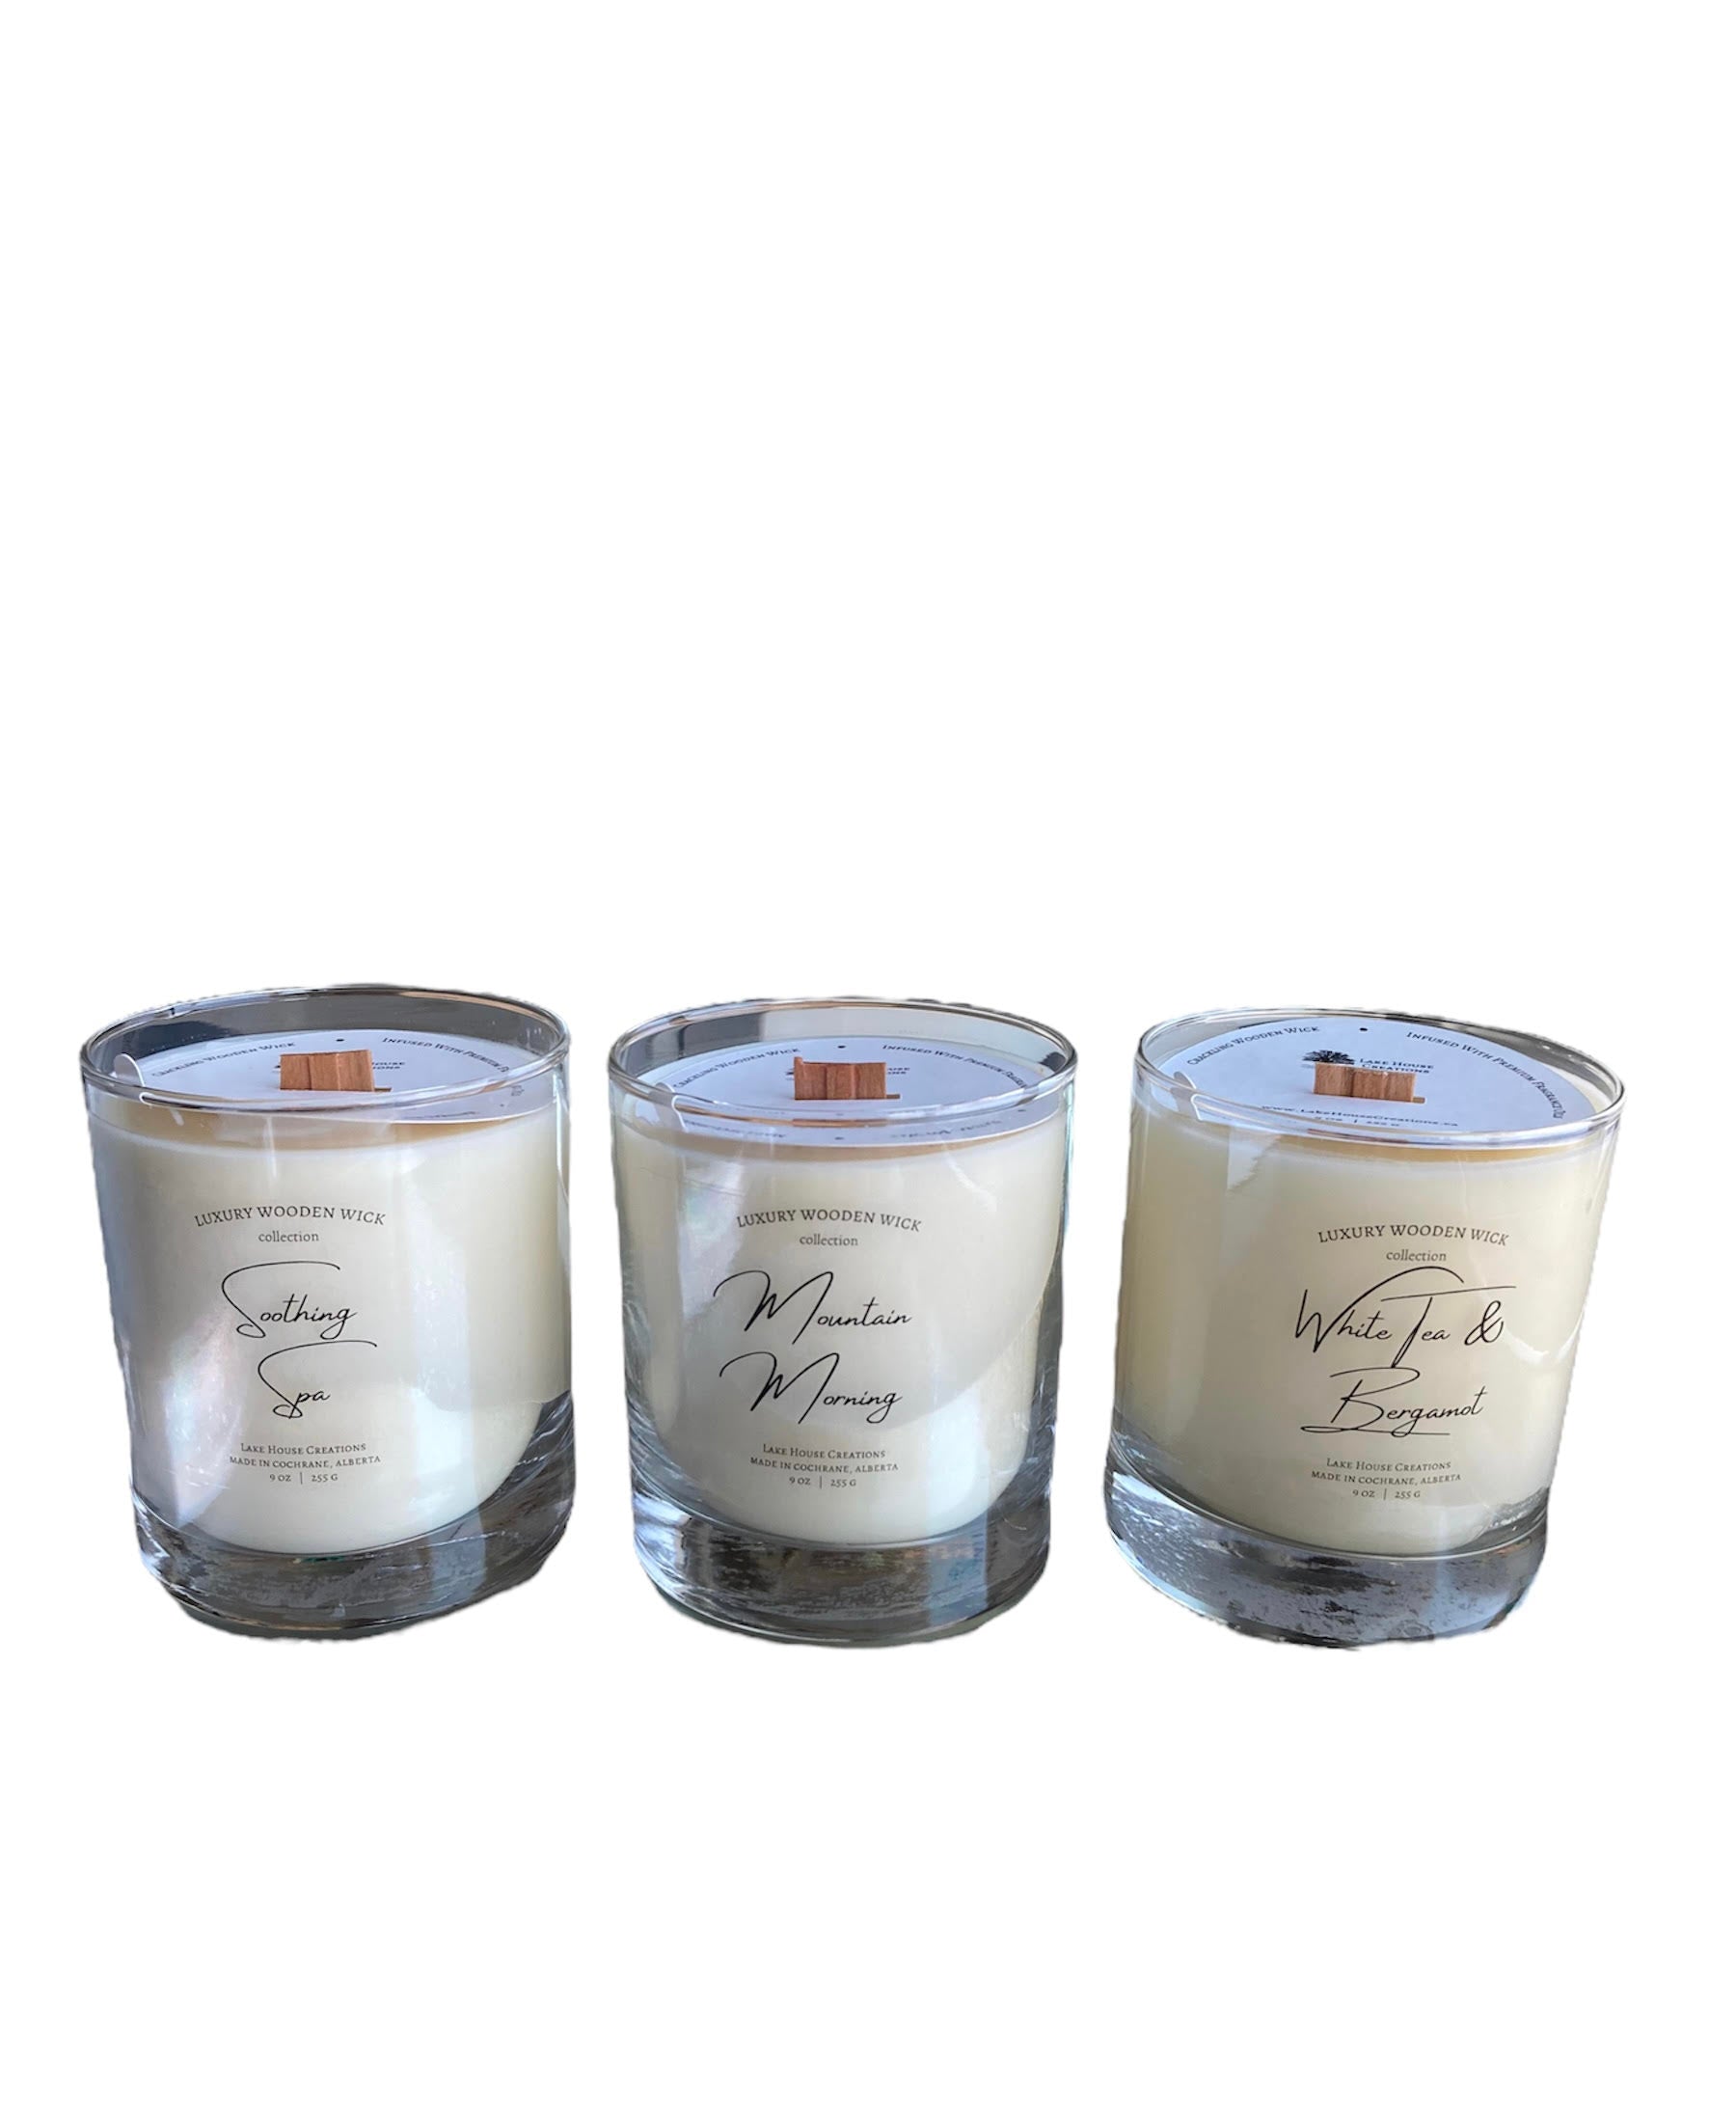 Luxury wooden wick candles